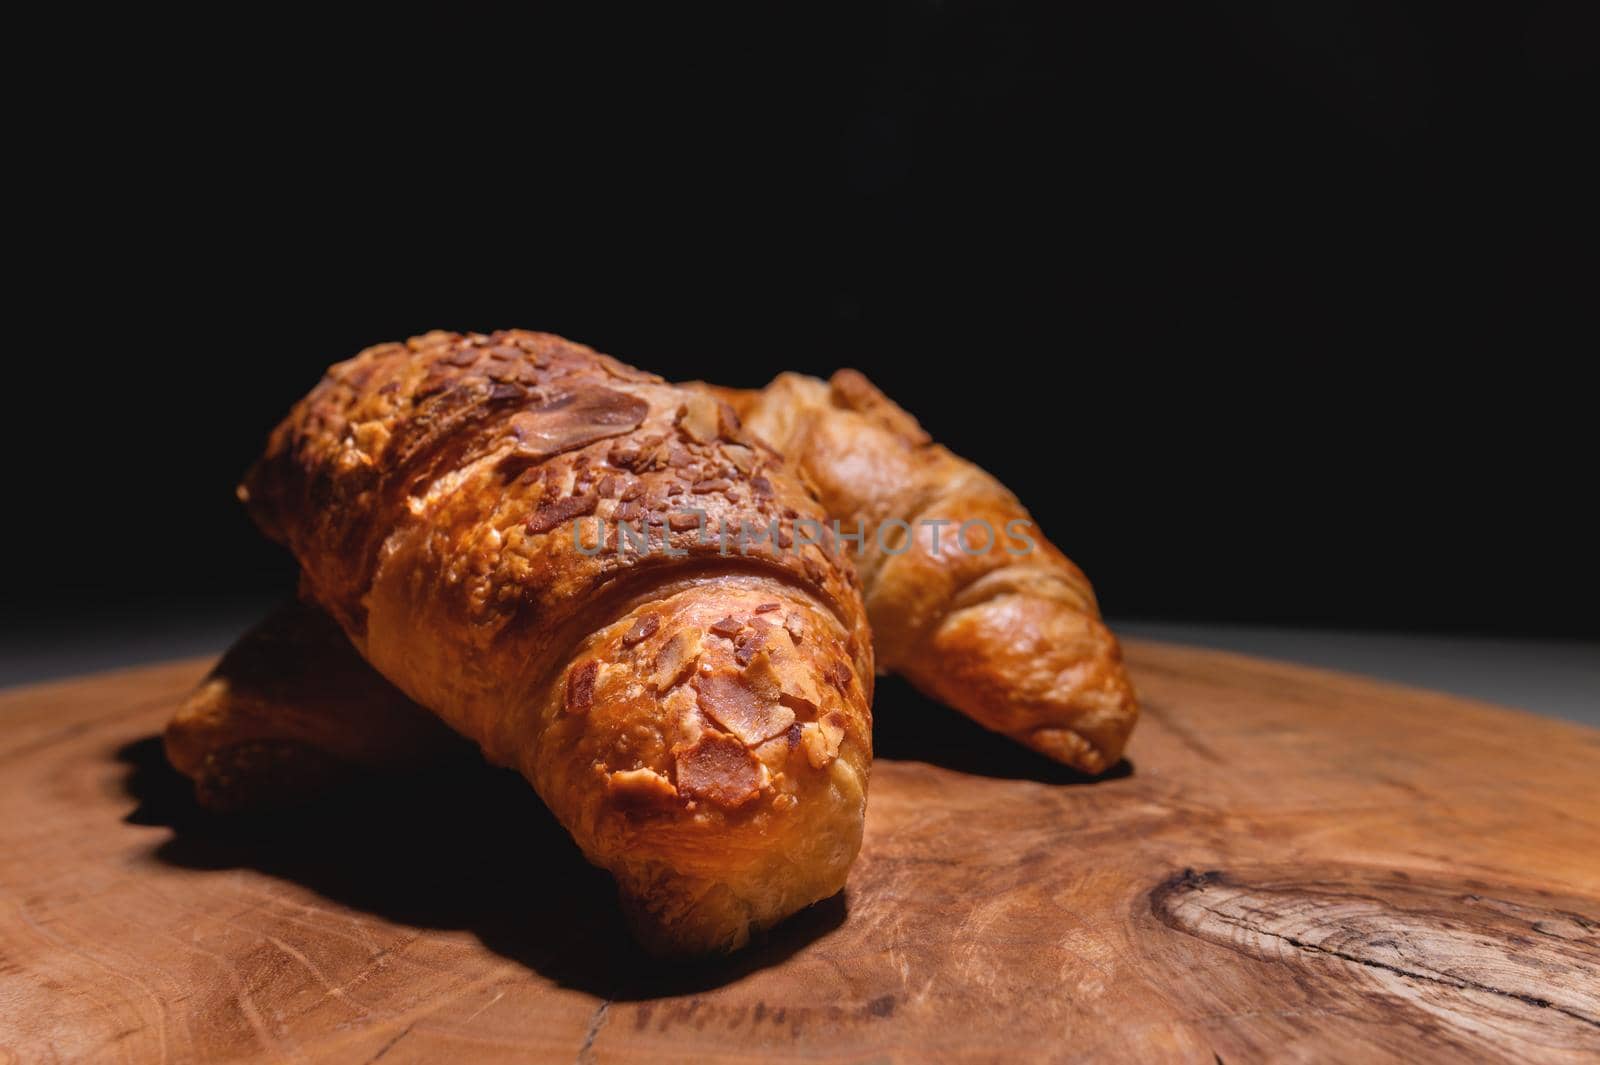 Several Croissants on a cutting board made of sawn wood on a dark background. Healthy and tasty breakfast.